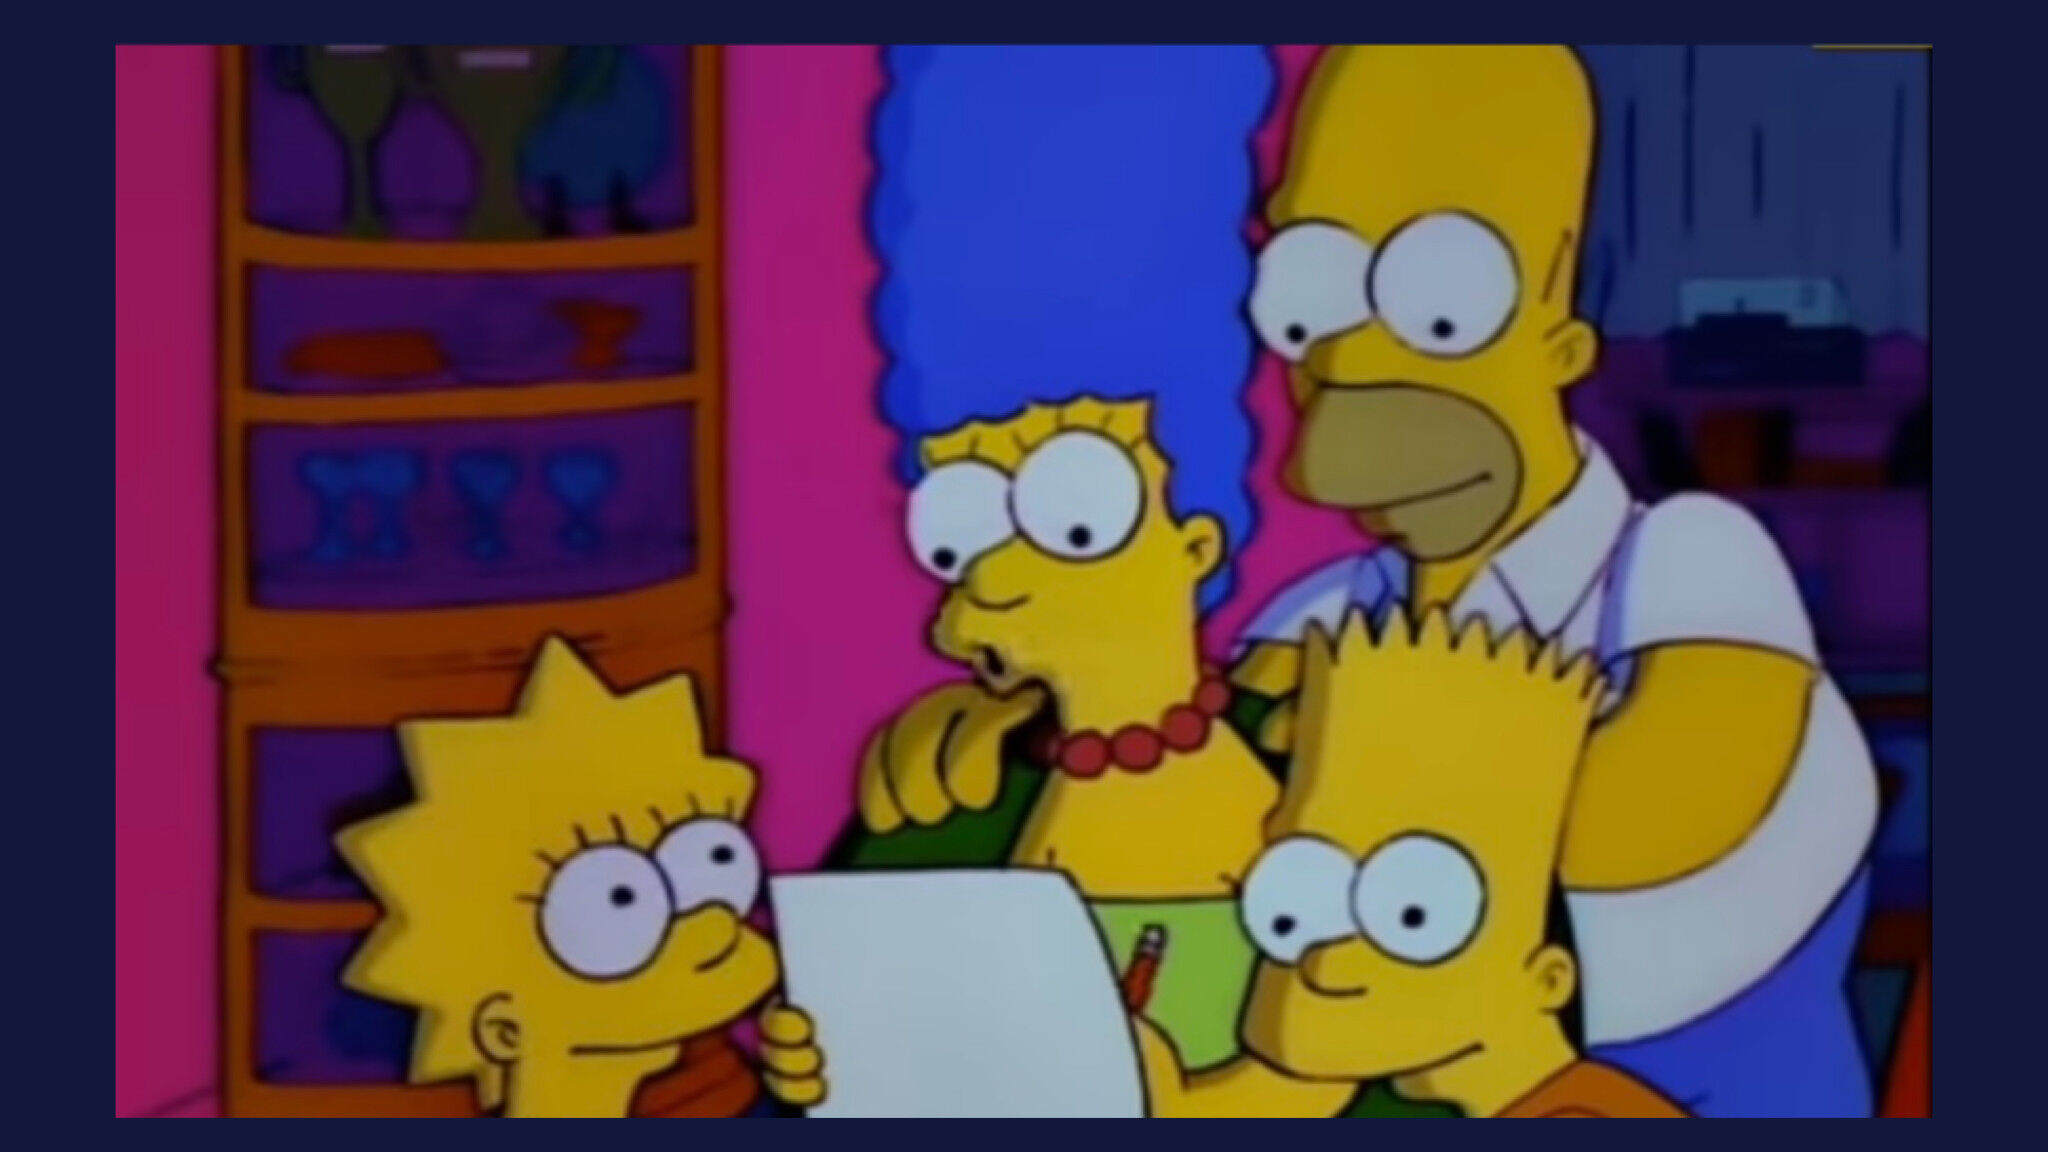 The Simpsons family (from left to right - Lisa, Marge, Homer, and Bart)